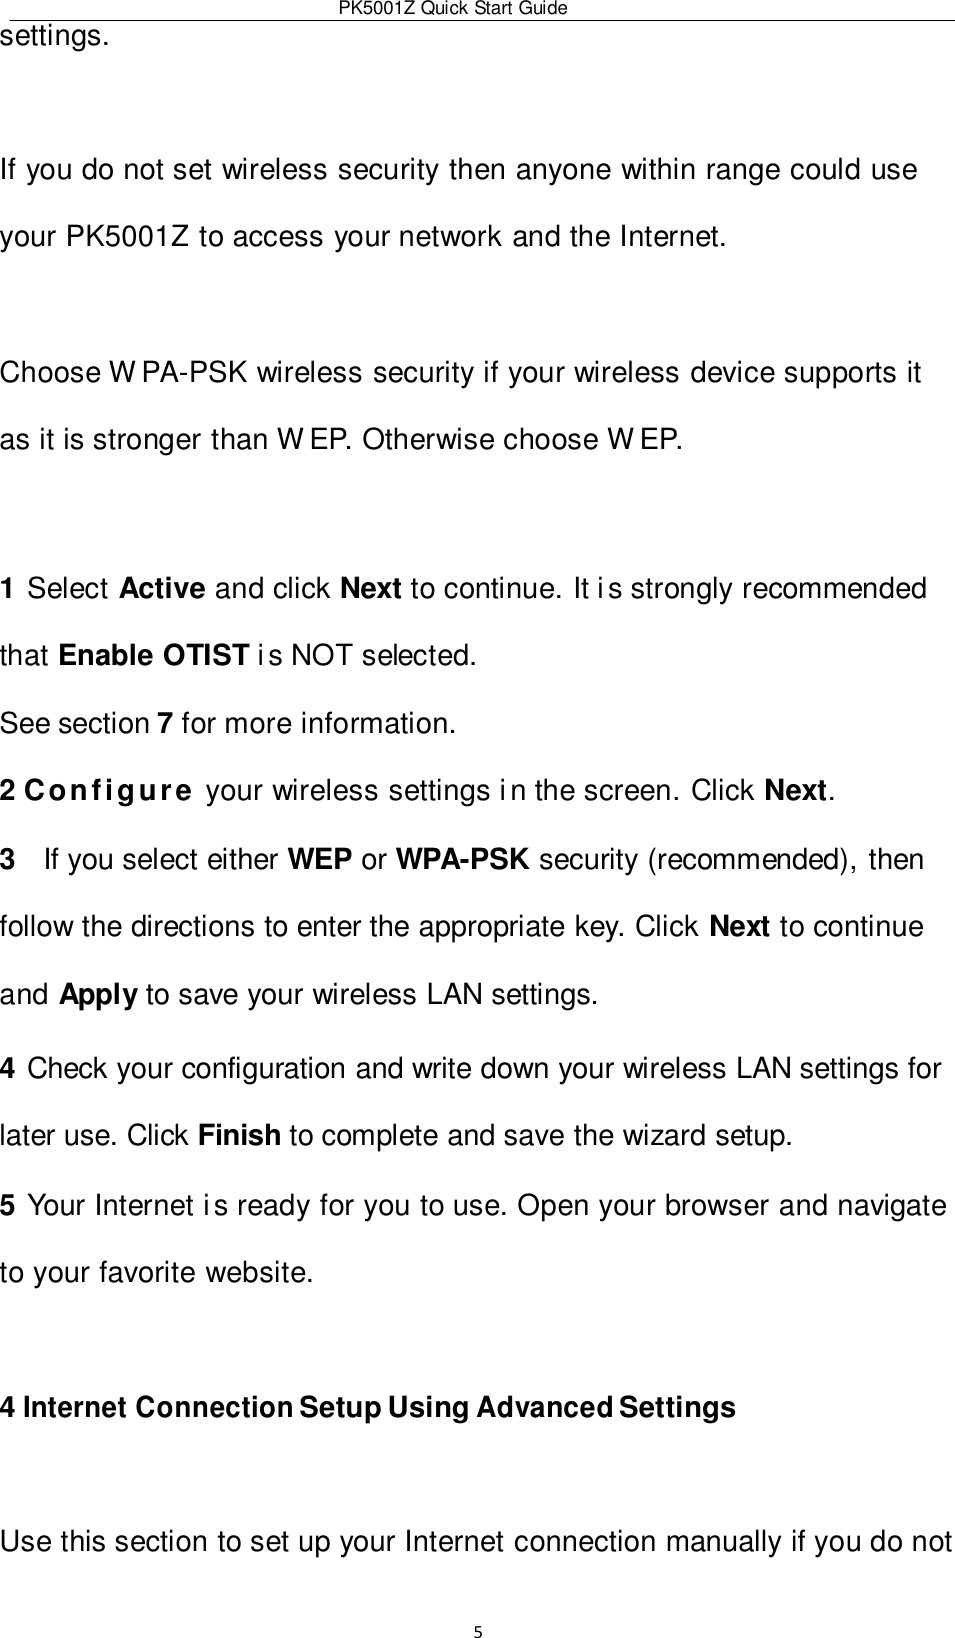 PK5001Z Quick Start Guide  5  settings.  If you do not set wireless security then anyone within range could use your PK5001Z to access your network and the Internet.  Choose W PA-PSK wireless security if your wireless device supports it as it is stronger than W EP. Otherwise choose W EP.  1 Select Active and click Next to continue. It i s strongly recommended that Enable OTIST i s NOT selected. See section 7 for more information. 2 Configure your wireless settings i n the screen. Click Next. 3   If you select either WEP or WPA-PSK security (recommended), then follow the directions to enter the appropriate key. Click Next to continue and Apply to save your wireless LAN settings. 4 Check your configuration and write down your wireless LAN settings for later use. Click Finish to complete and save the wizard setup. 5 Your Internet i s ready for you to use. Open your browser and navigate to your favorite website.  4 Internet Connection Setup Using Advanced Settings  Use this section to set up your Internet connection manually if you do not 